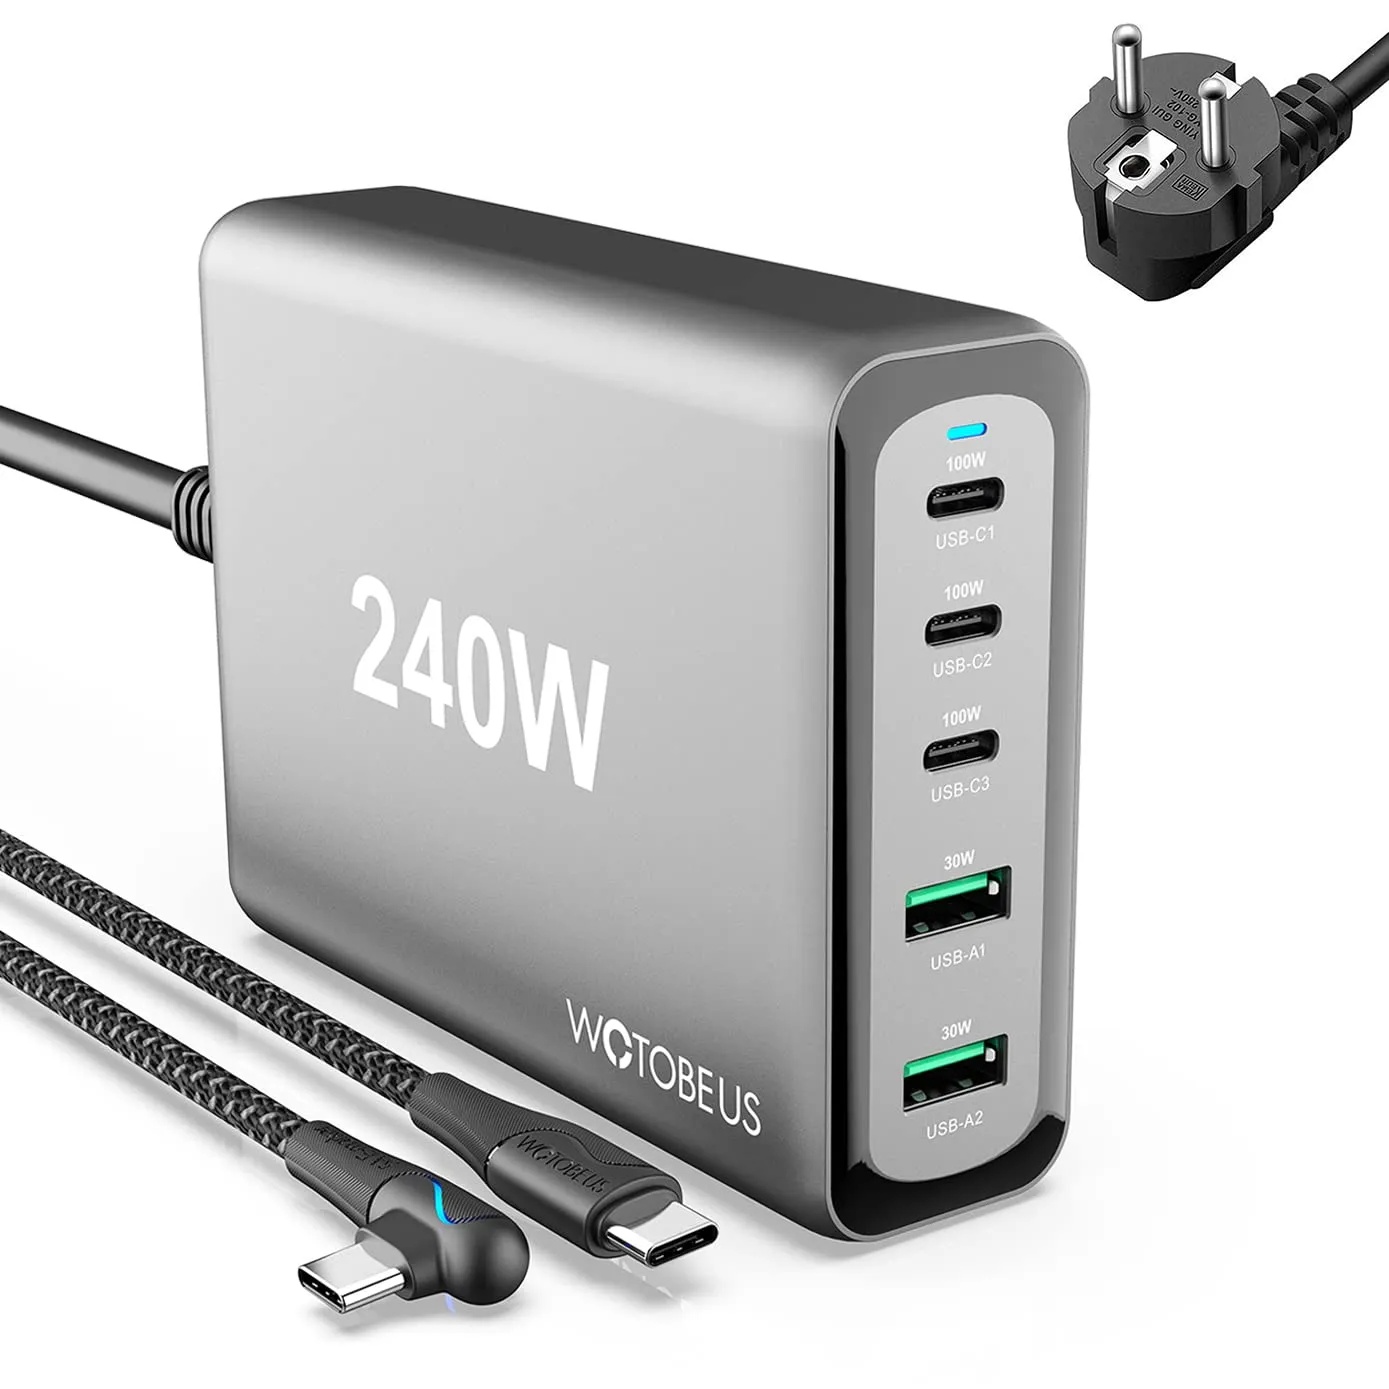 [UK] WOTOBEUS 240W USB C Charger Station GaN PD100W 65W 30W PPS45W Super Fast Charging Wall Power Adapter Type-C Lapto for iPhone 13 Pro Max iPad MacBook Pixel Samsung Galaxy Note S22